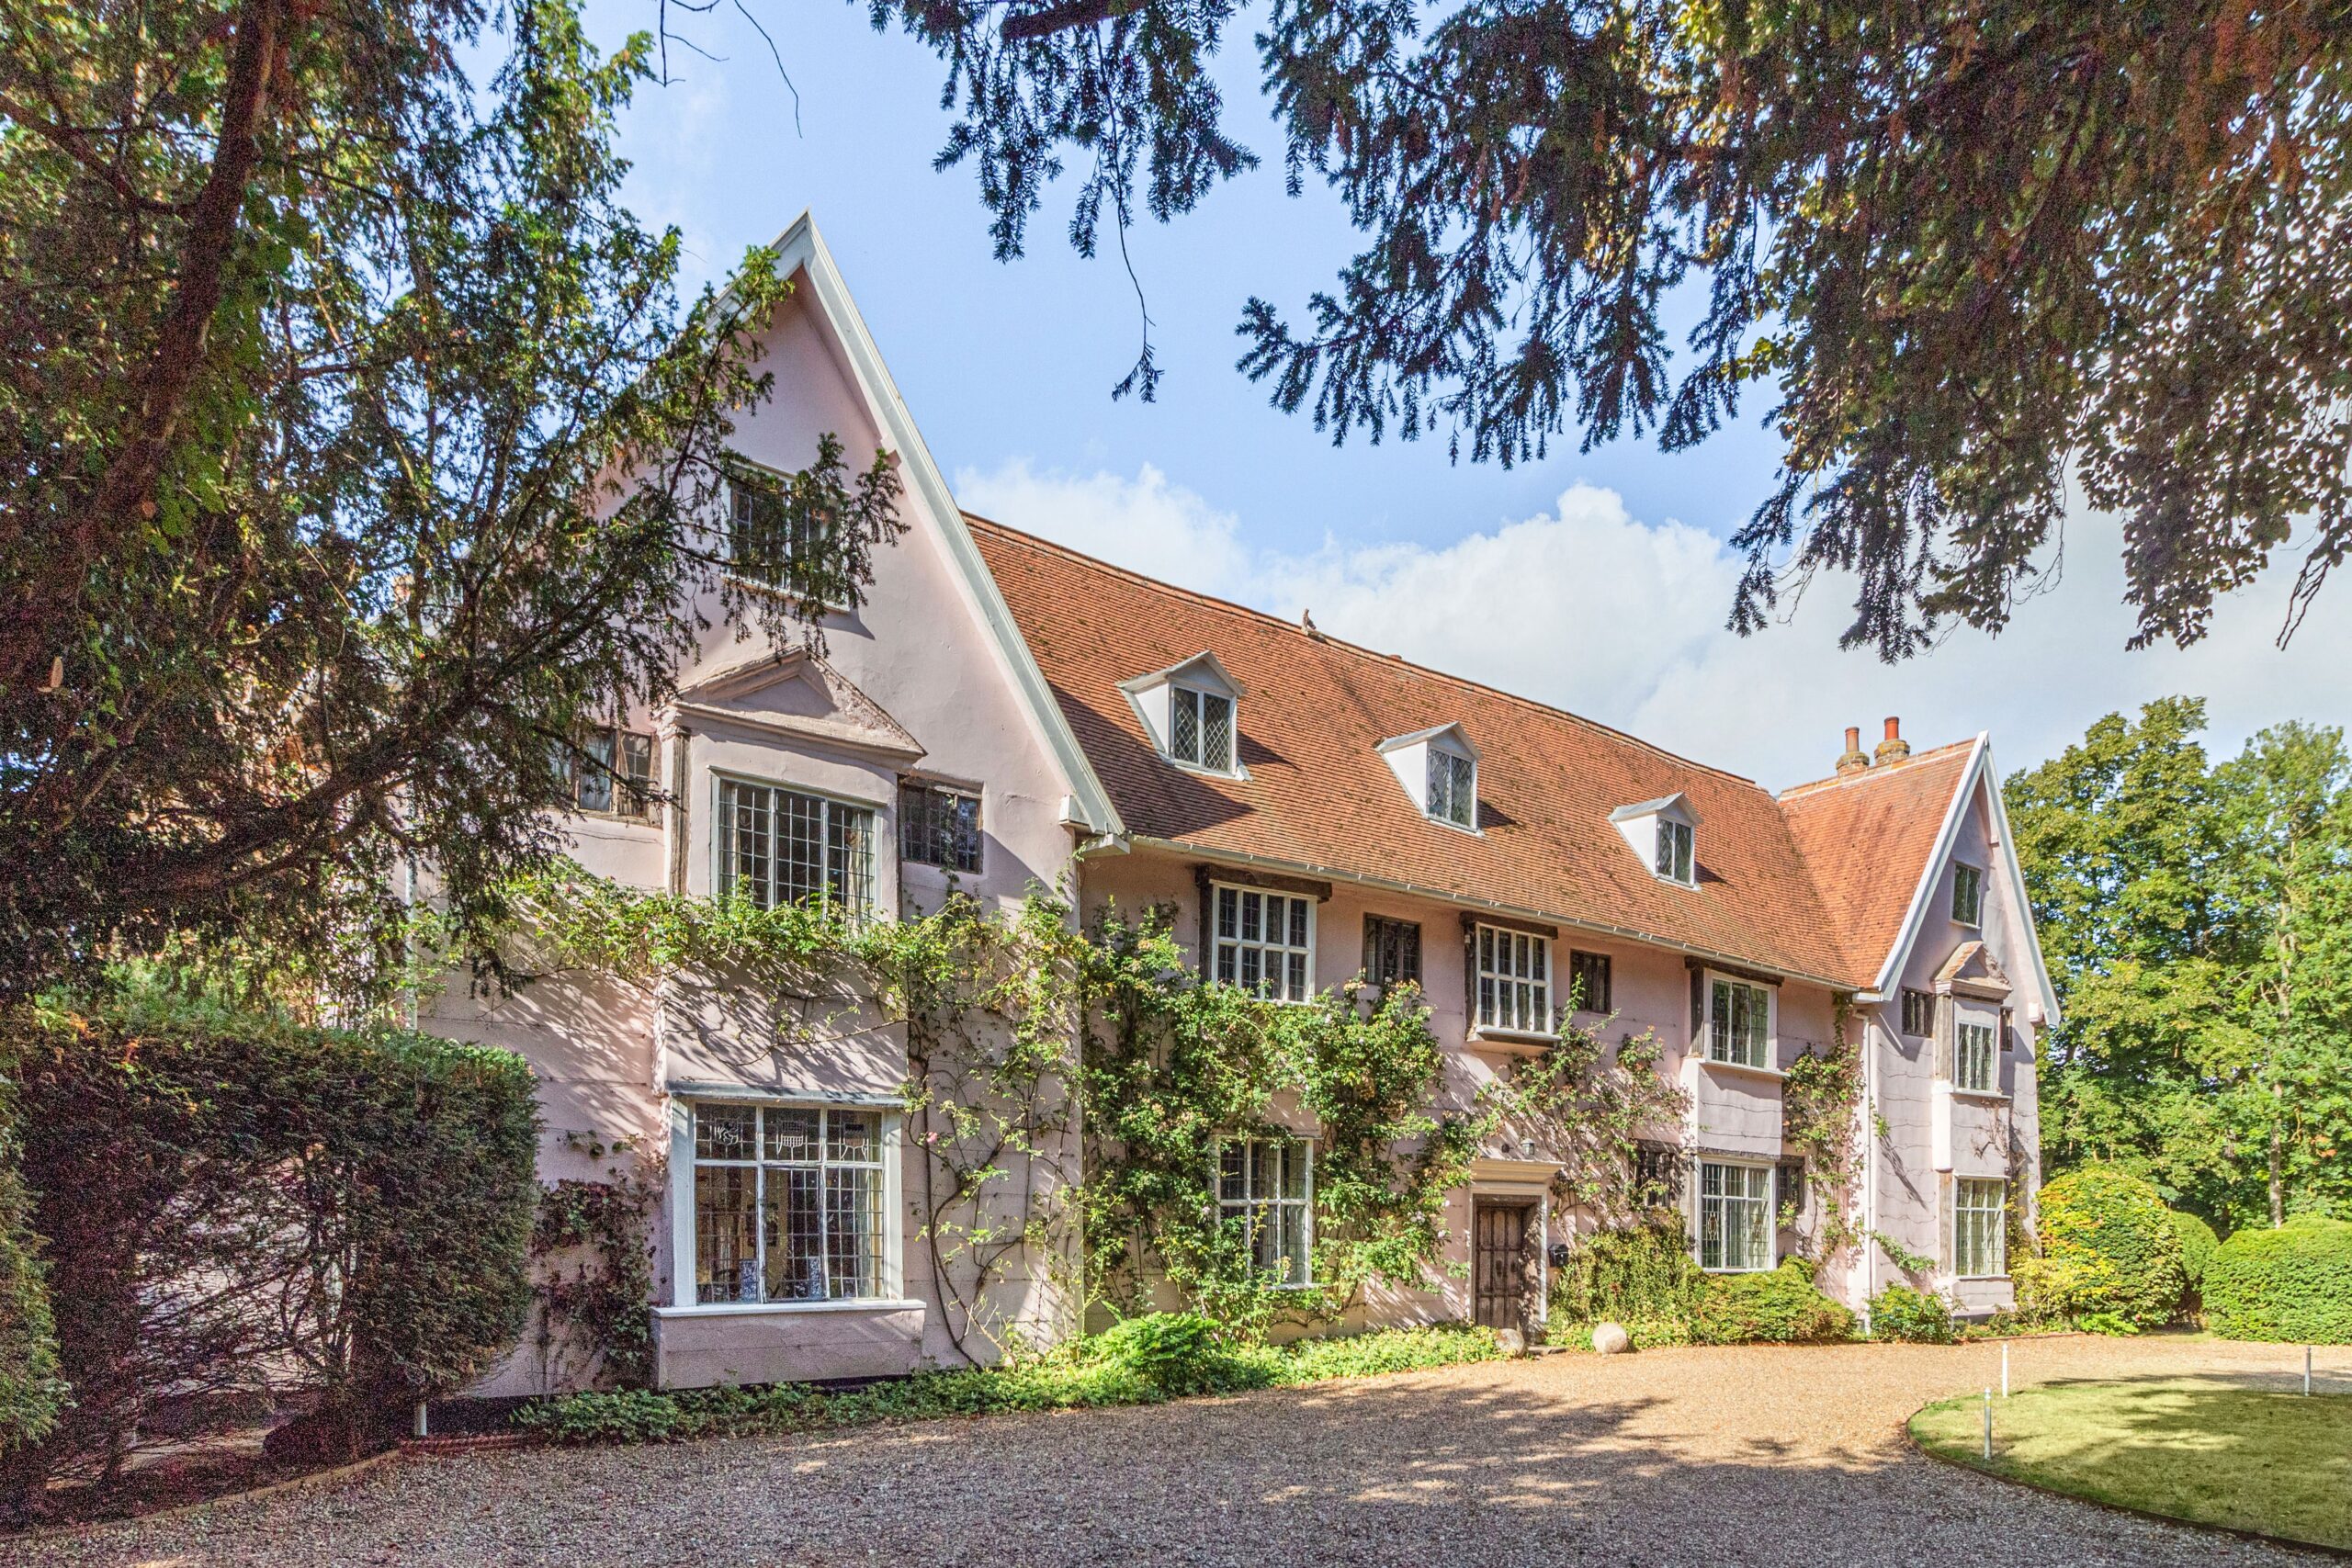 inside-the-spectacular-blo’norton-hall,-haunt-of-virginia-woolf-and-prince-frederick-duleep-singh-–-which-could-be-yours-for-2.6-million